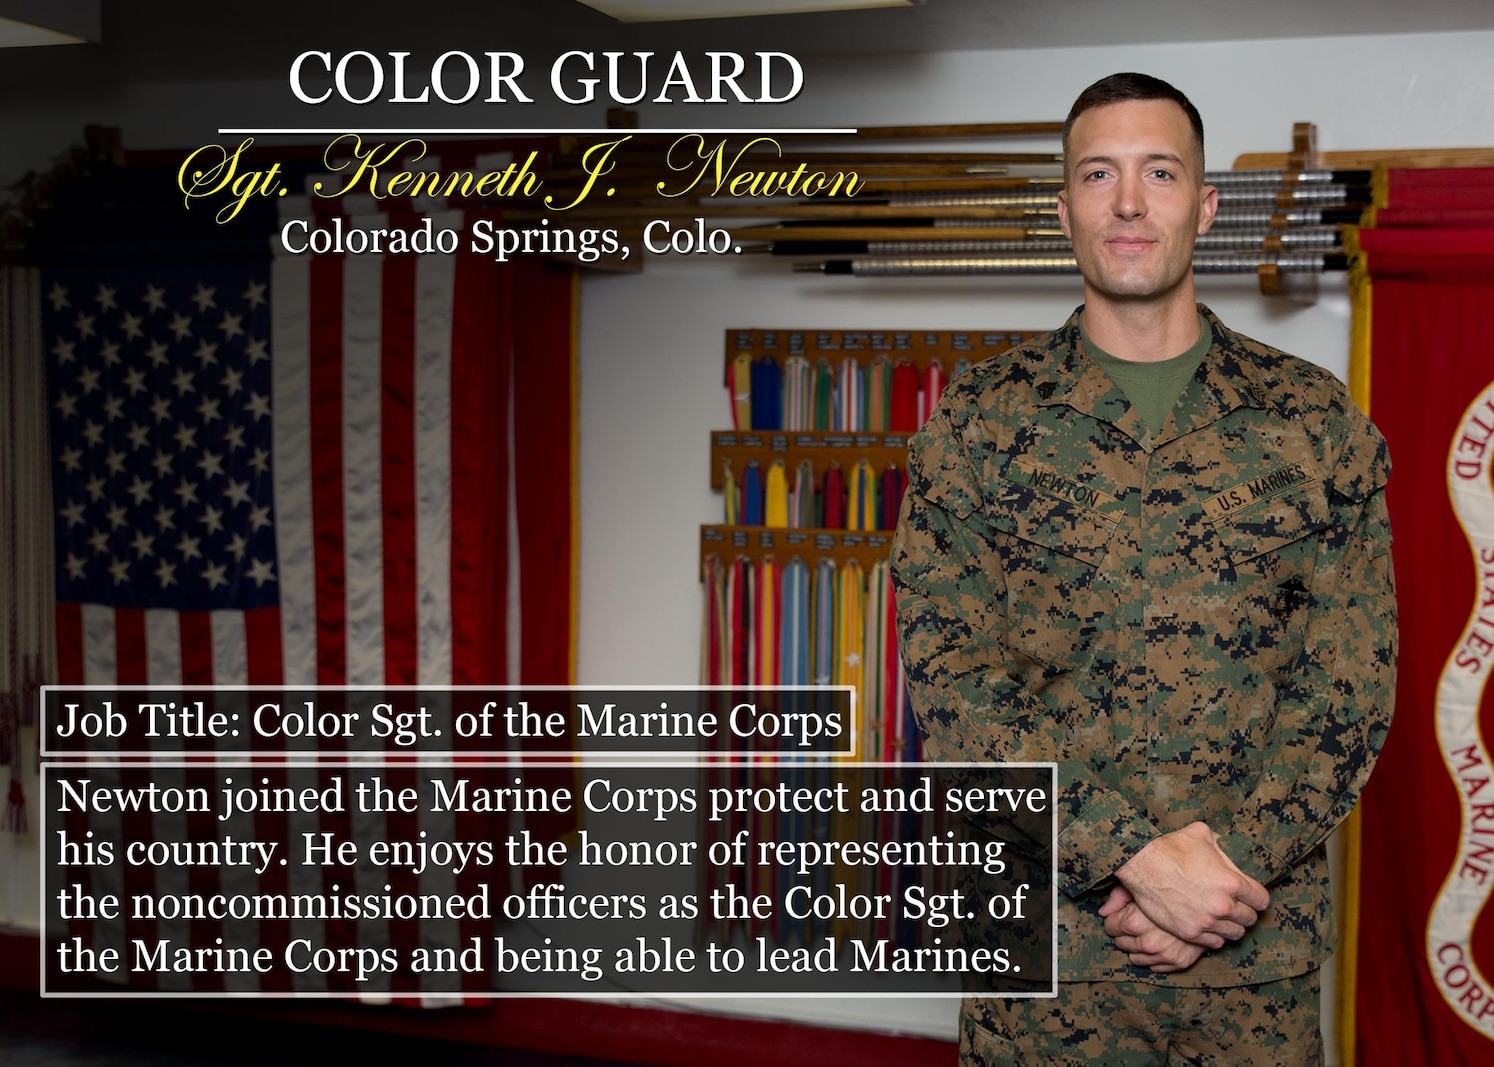 Sgt. Kenneth J.  Newton
Colorado Springs, Colo.
Job Title: Color Sgt. of the Marine Corps
Newton joined the Marine Corps protect and serve his country. He enjoys the honor of representing the noncommissioned officers as the Color Sgt. of the Marine Corps and being able to lead Marines.

(Official Marine Corps graphic by Cpl. Chi Nguyen/Released)